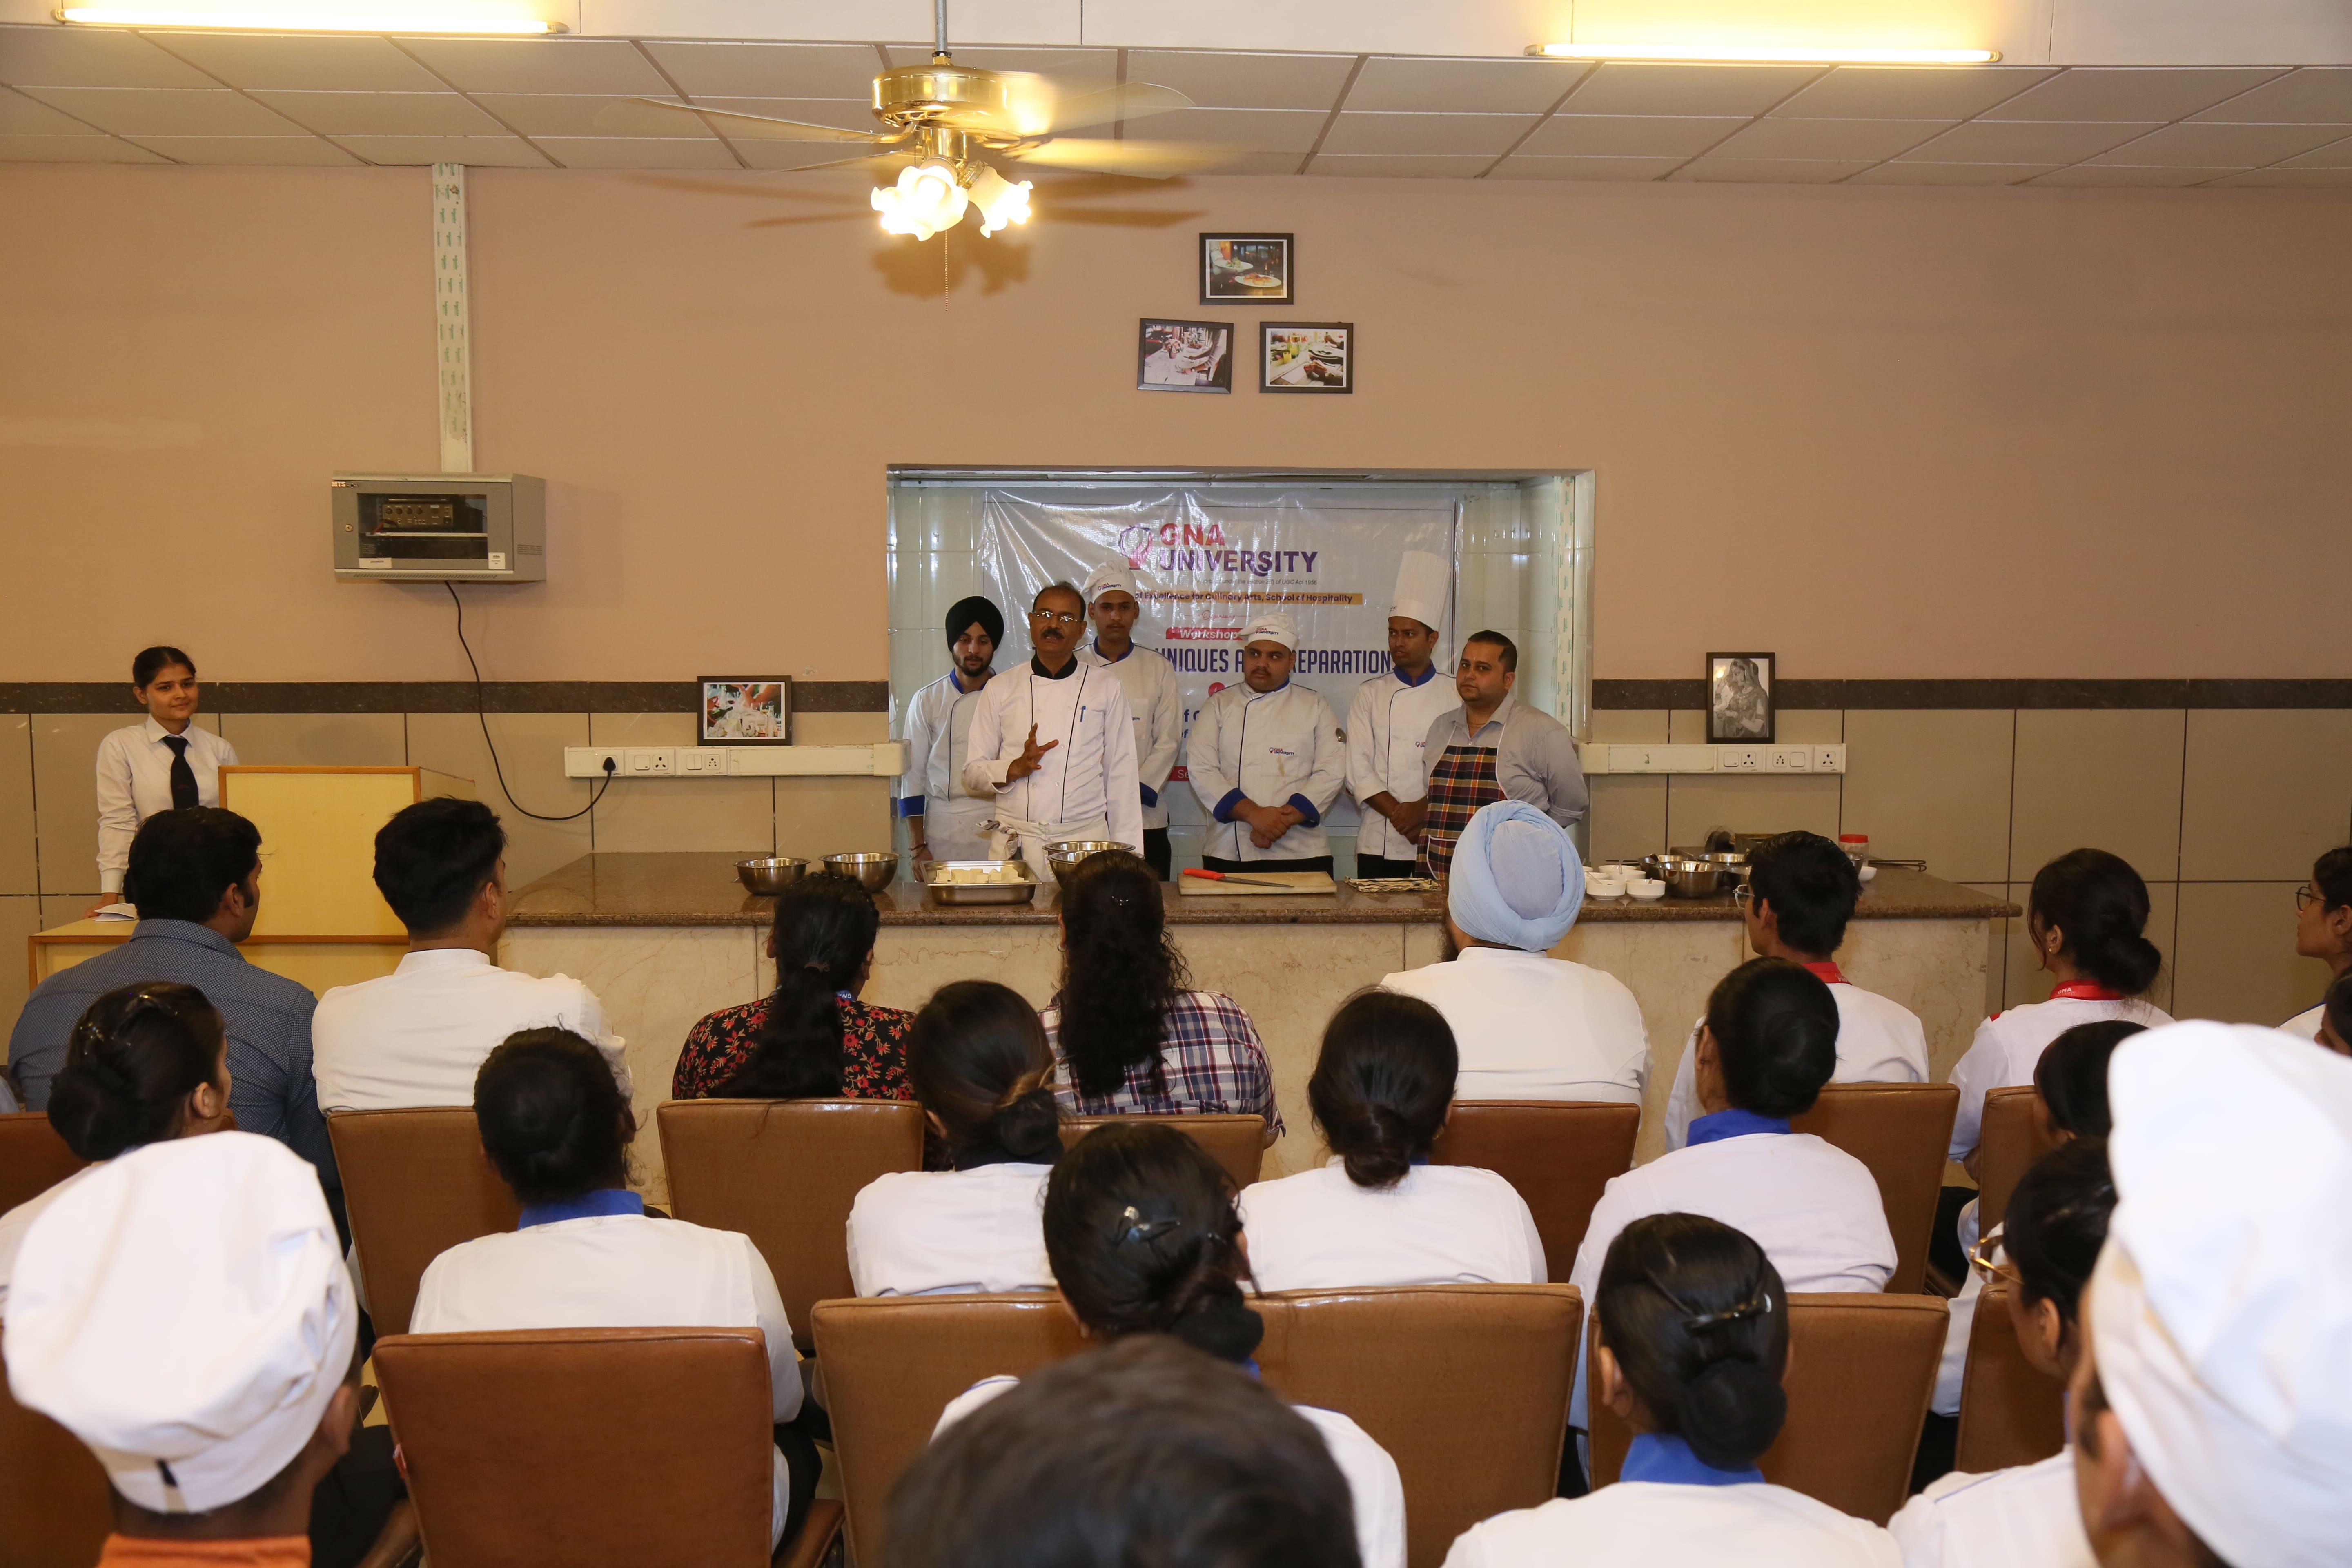 Workshop on Tandoori Techniques and Preparations @ GNA Uiversity